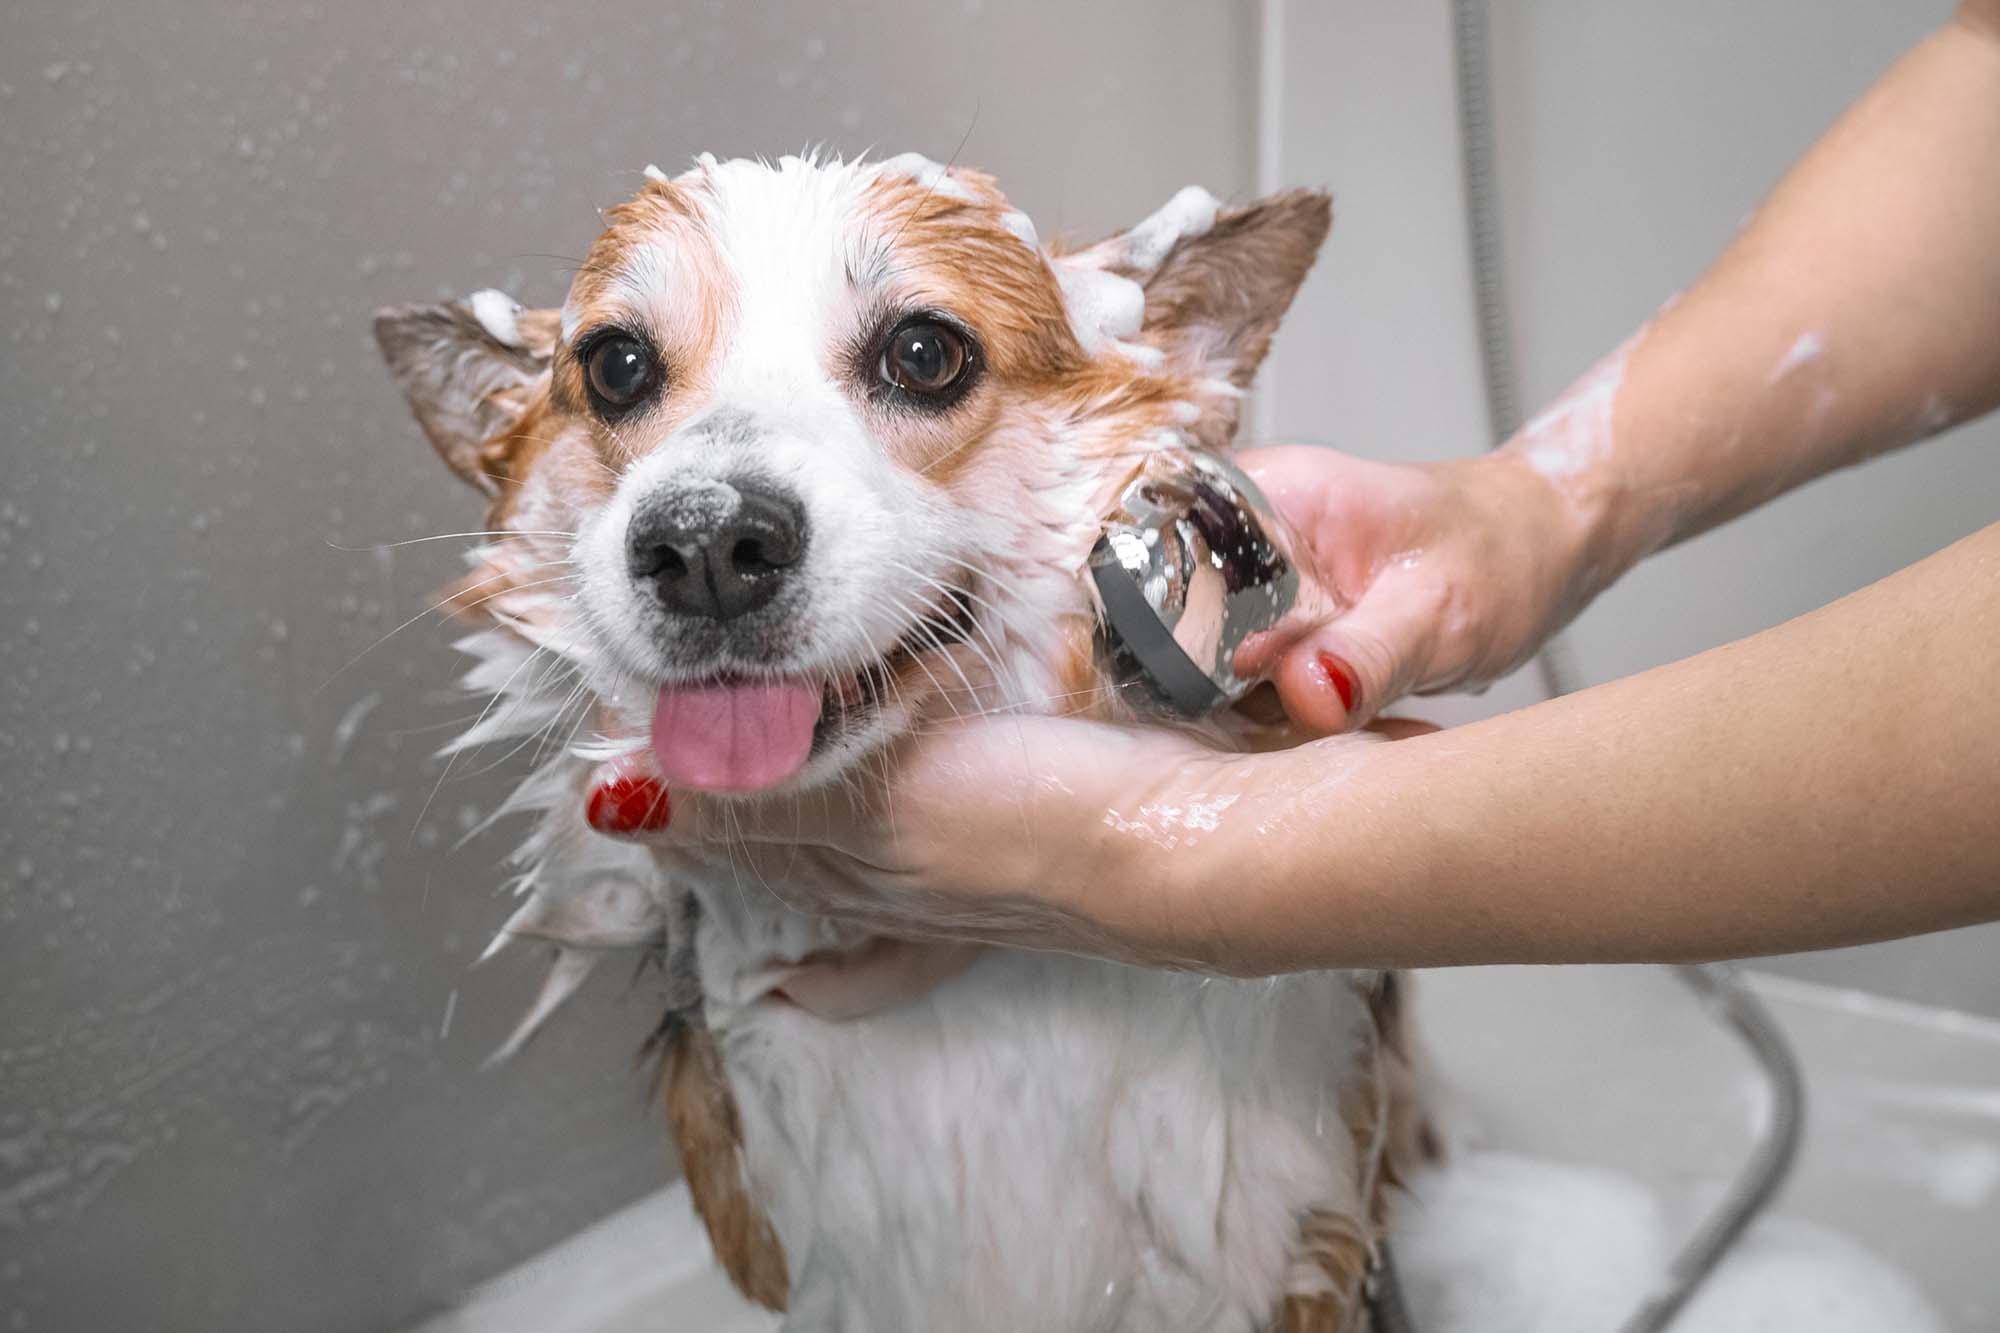 Small dog getting washed